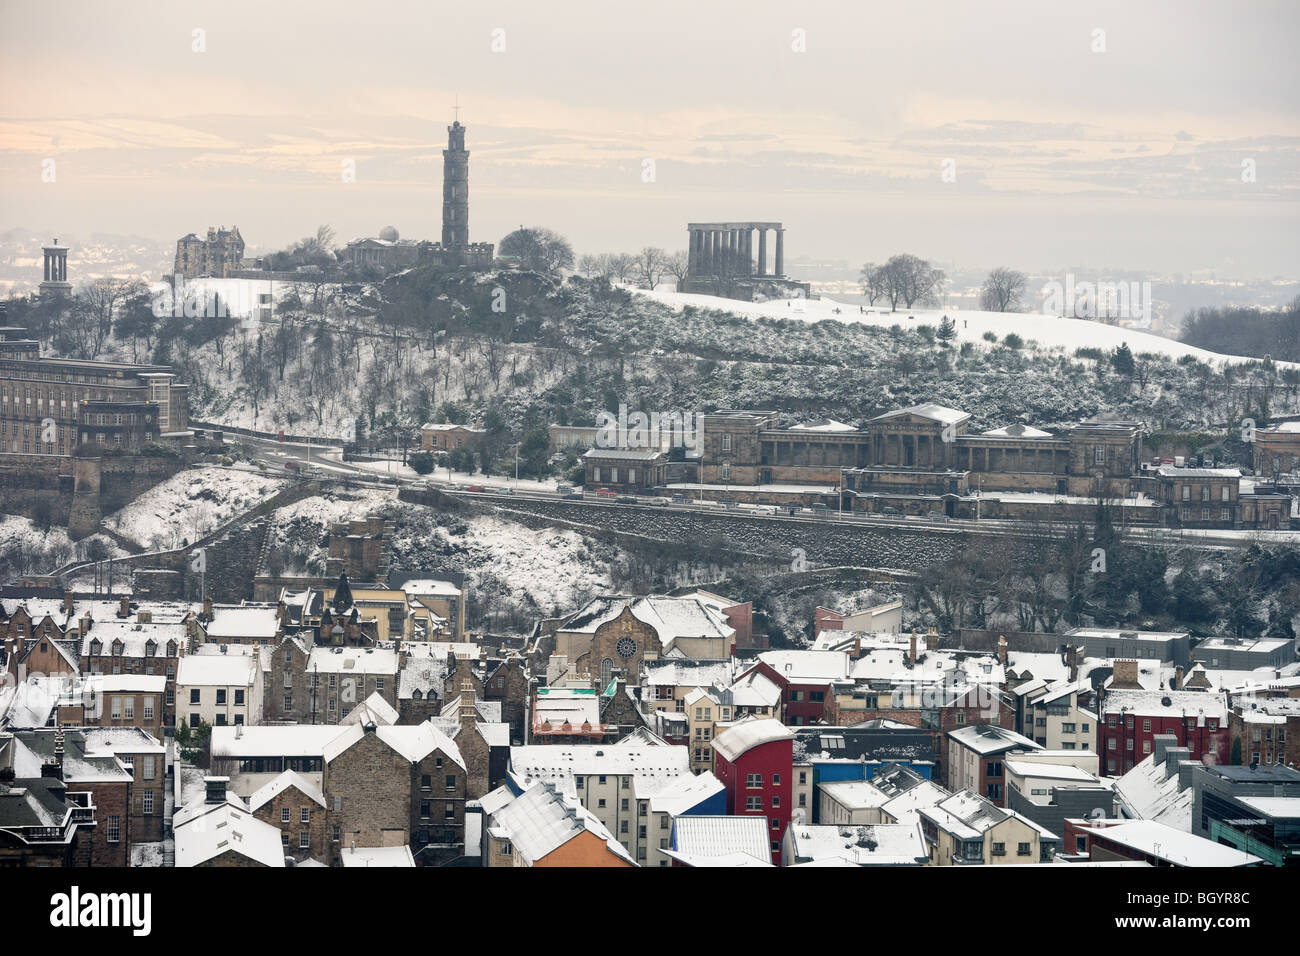 Calton Hill, Edinburgh, Scotland, UK, from the south, in the snow. Fife is just visible across the Firth of Forth. Stock Photo